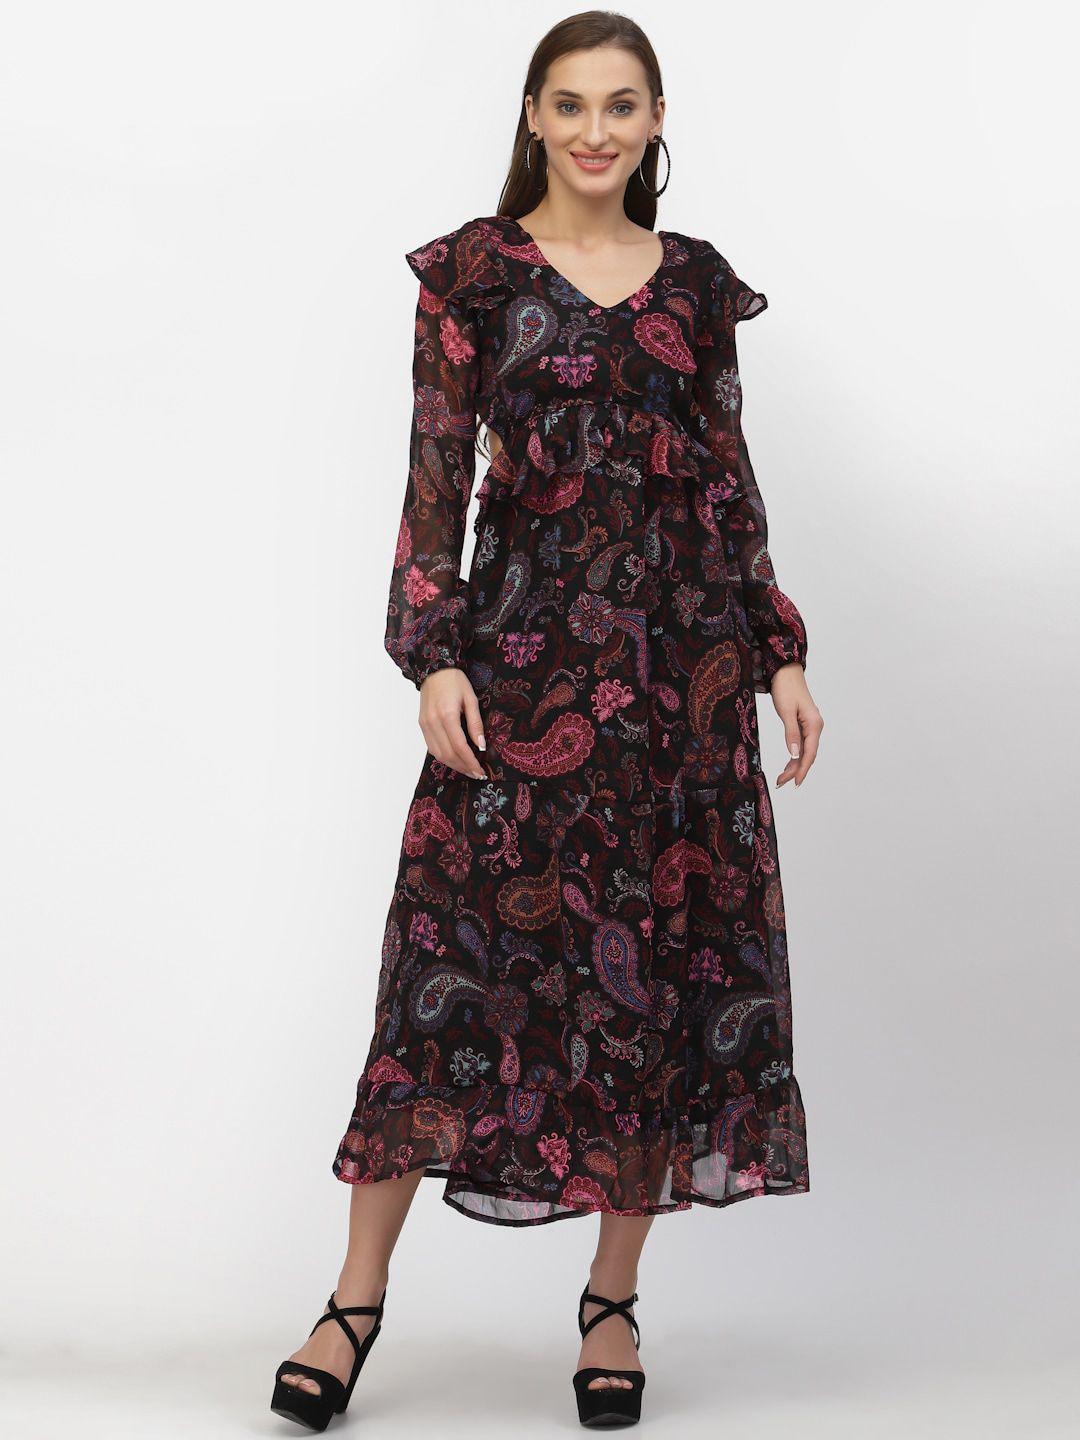 flawless-bishop-sleeves-ethnic-motifs-printed-midi-dress-comes-with-a-scrunchie